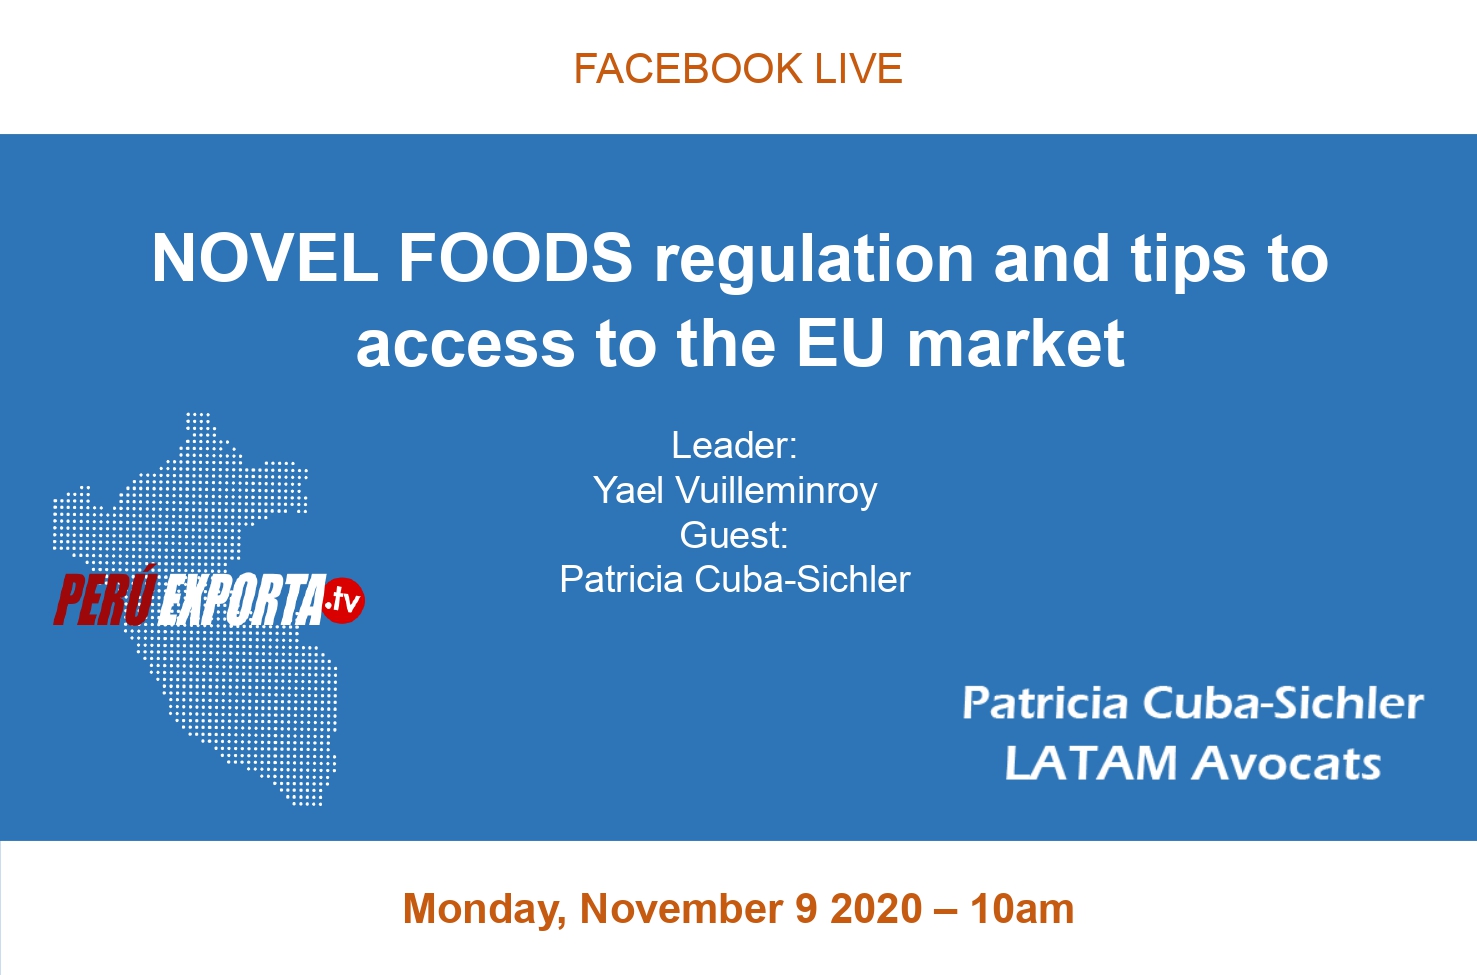 NOVEL FOODS how to access to the European Union market